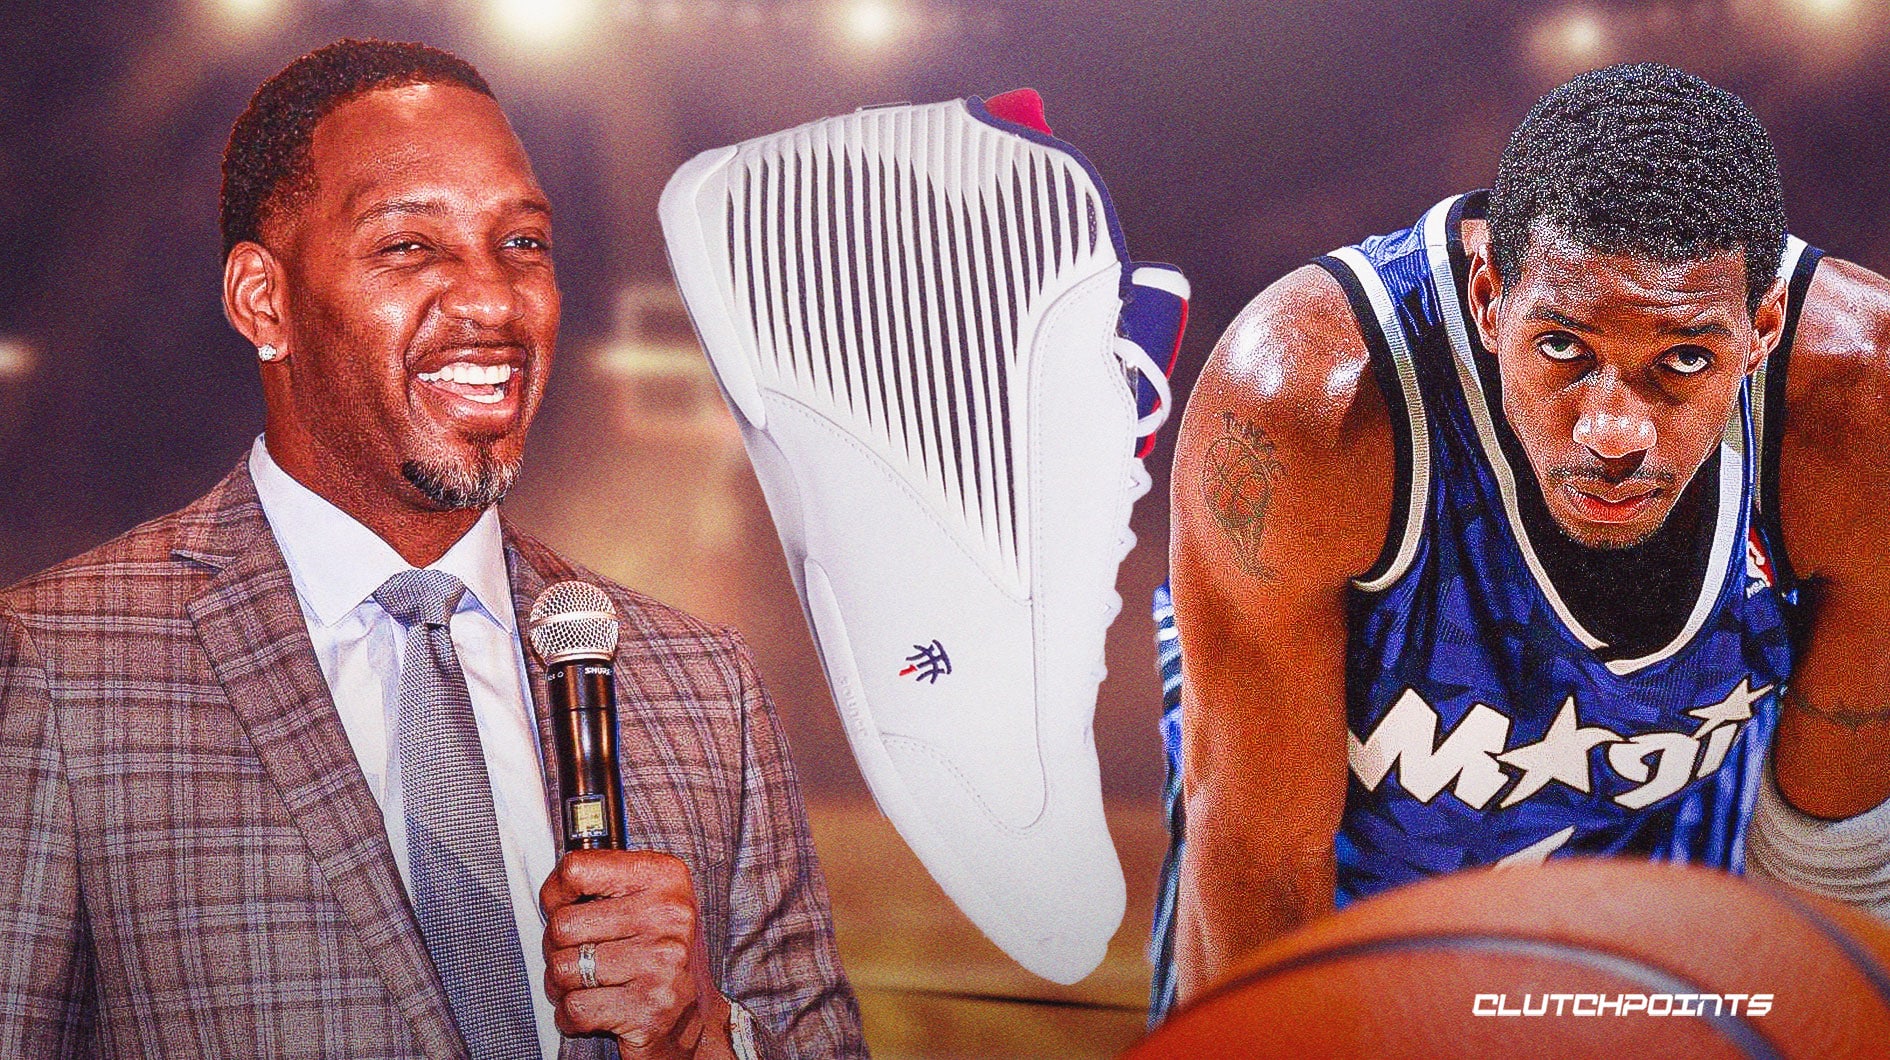 Tracy McGrady Wants to Build the UFC of Basketball